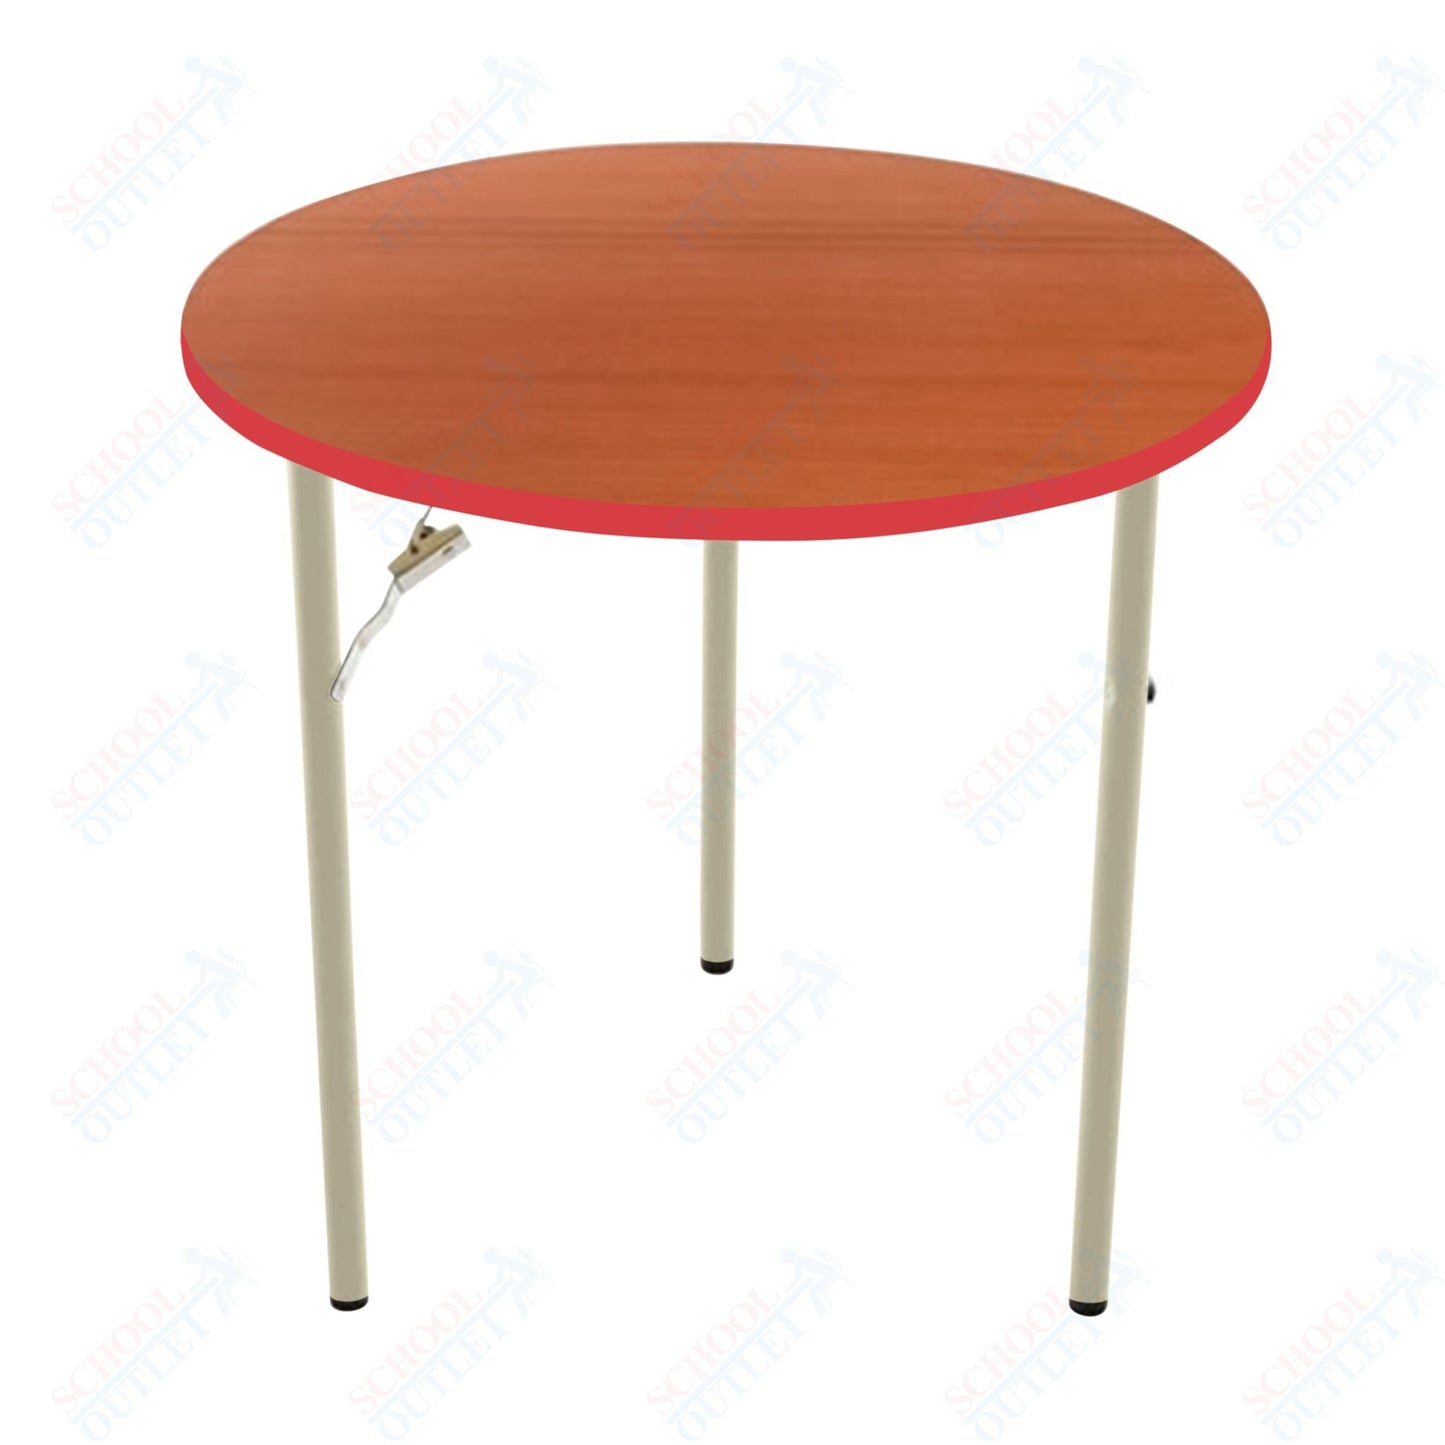 AmTab Folding Table - Plywood Stained and Sealed - Vinyl T - Molding Edge - Round - 66" Diameter x 29"H (AmTab AMT - R66PM) - SchoolOutlet